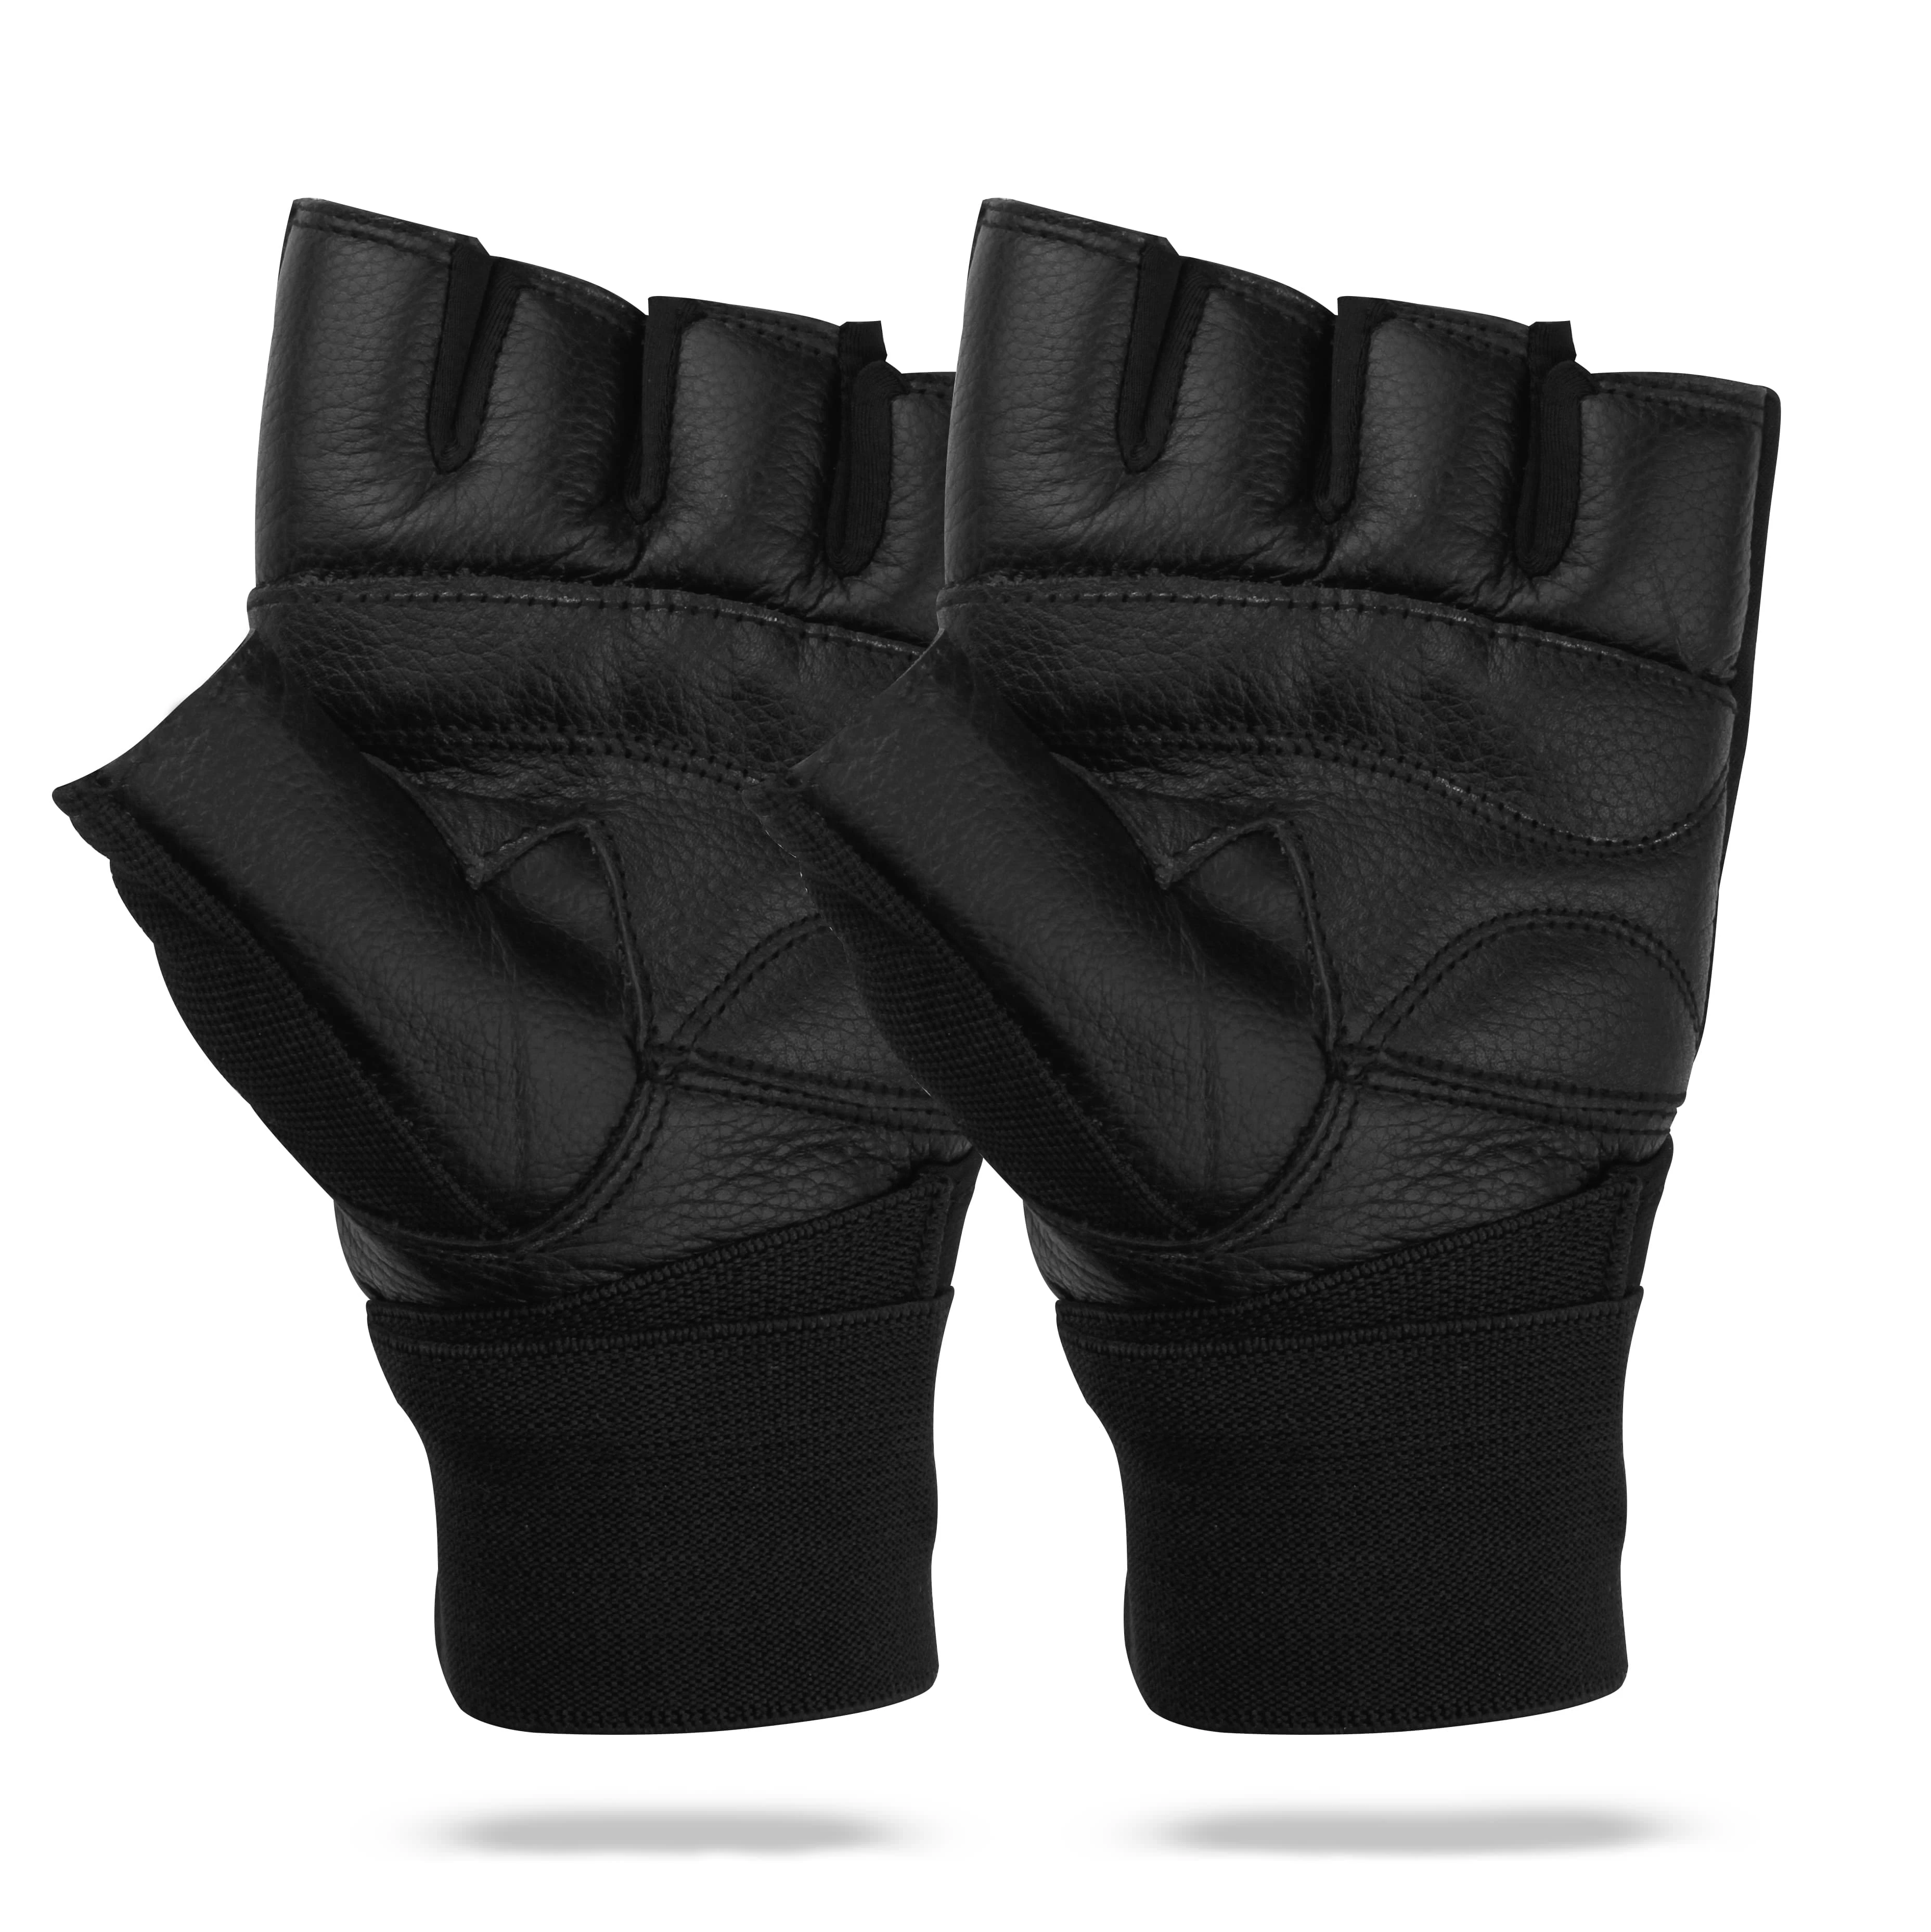 High-quality half fingers protective training fitness cycling climbing Tactical Gloves